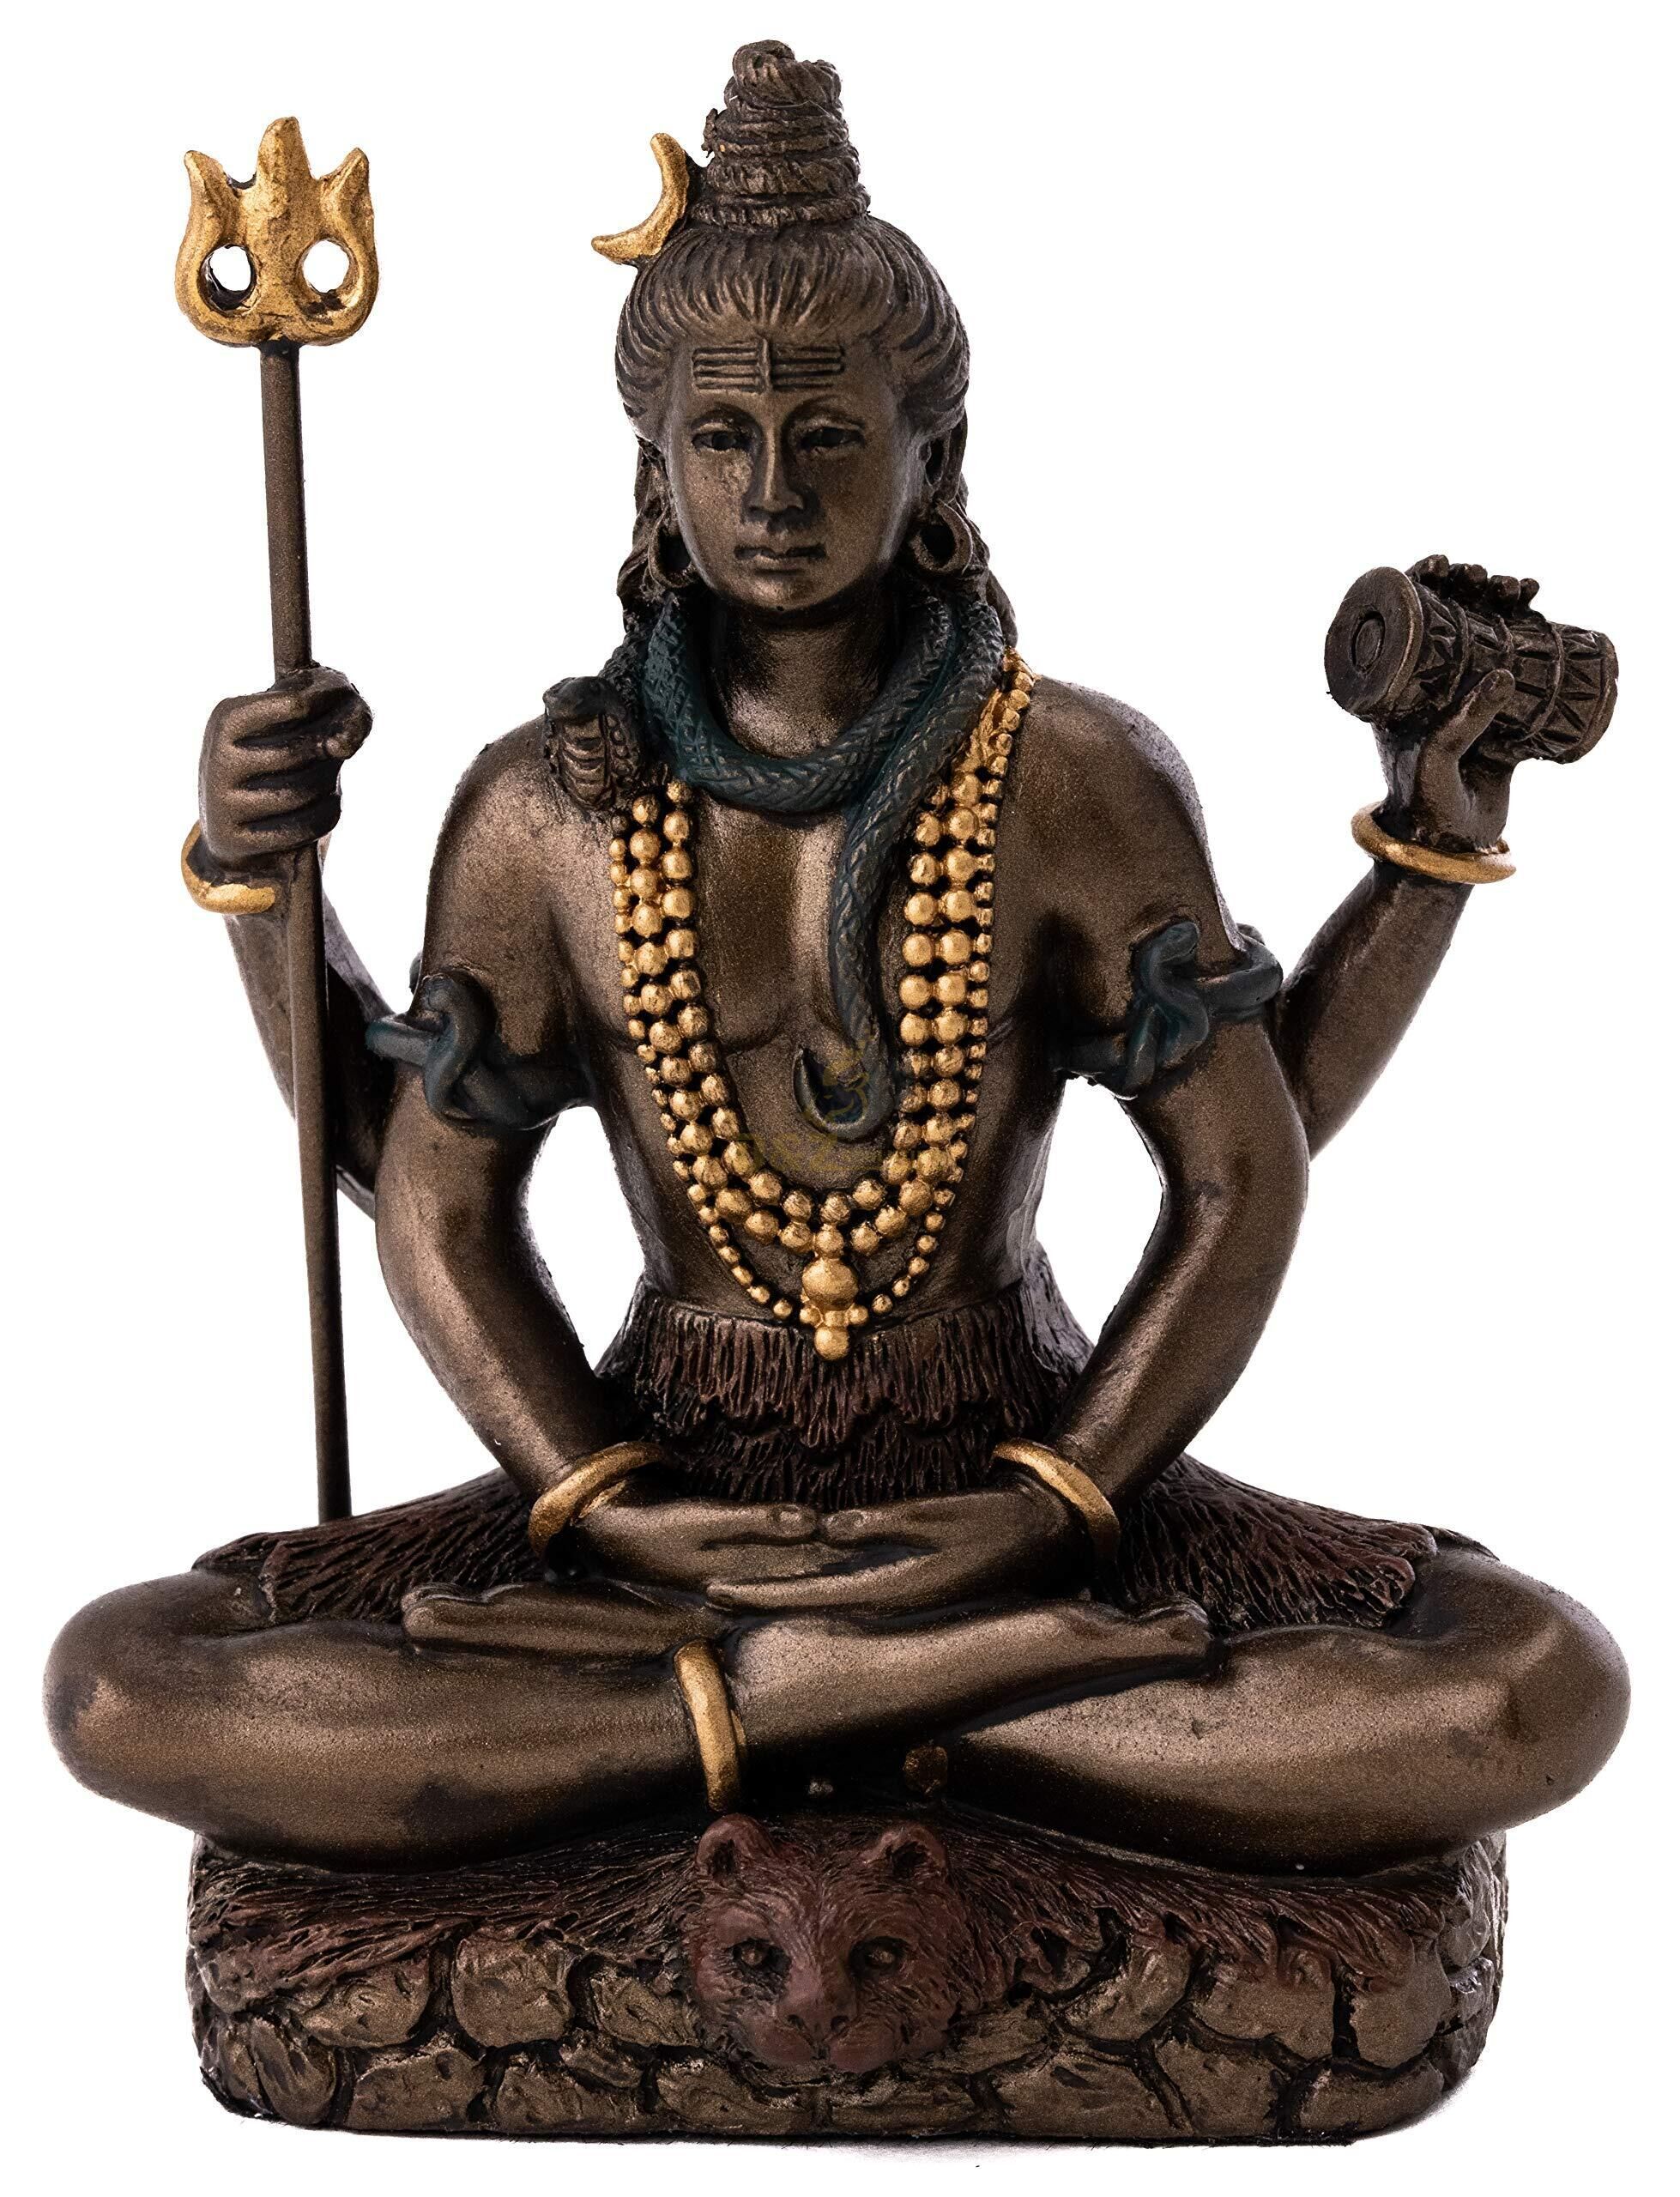 Antique life-size handmade god shiva statue bronze sculpture with outdoor decoration